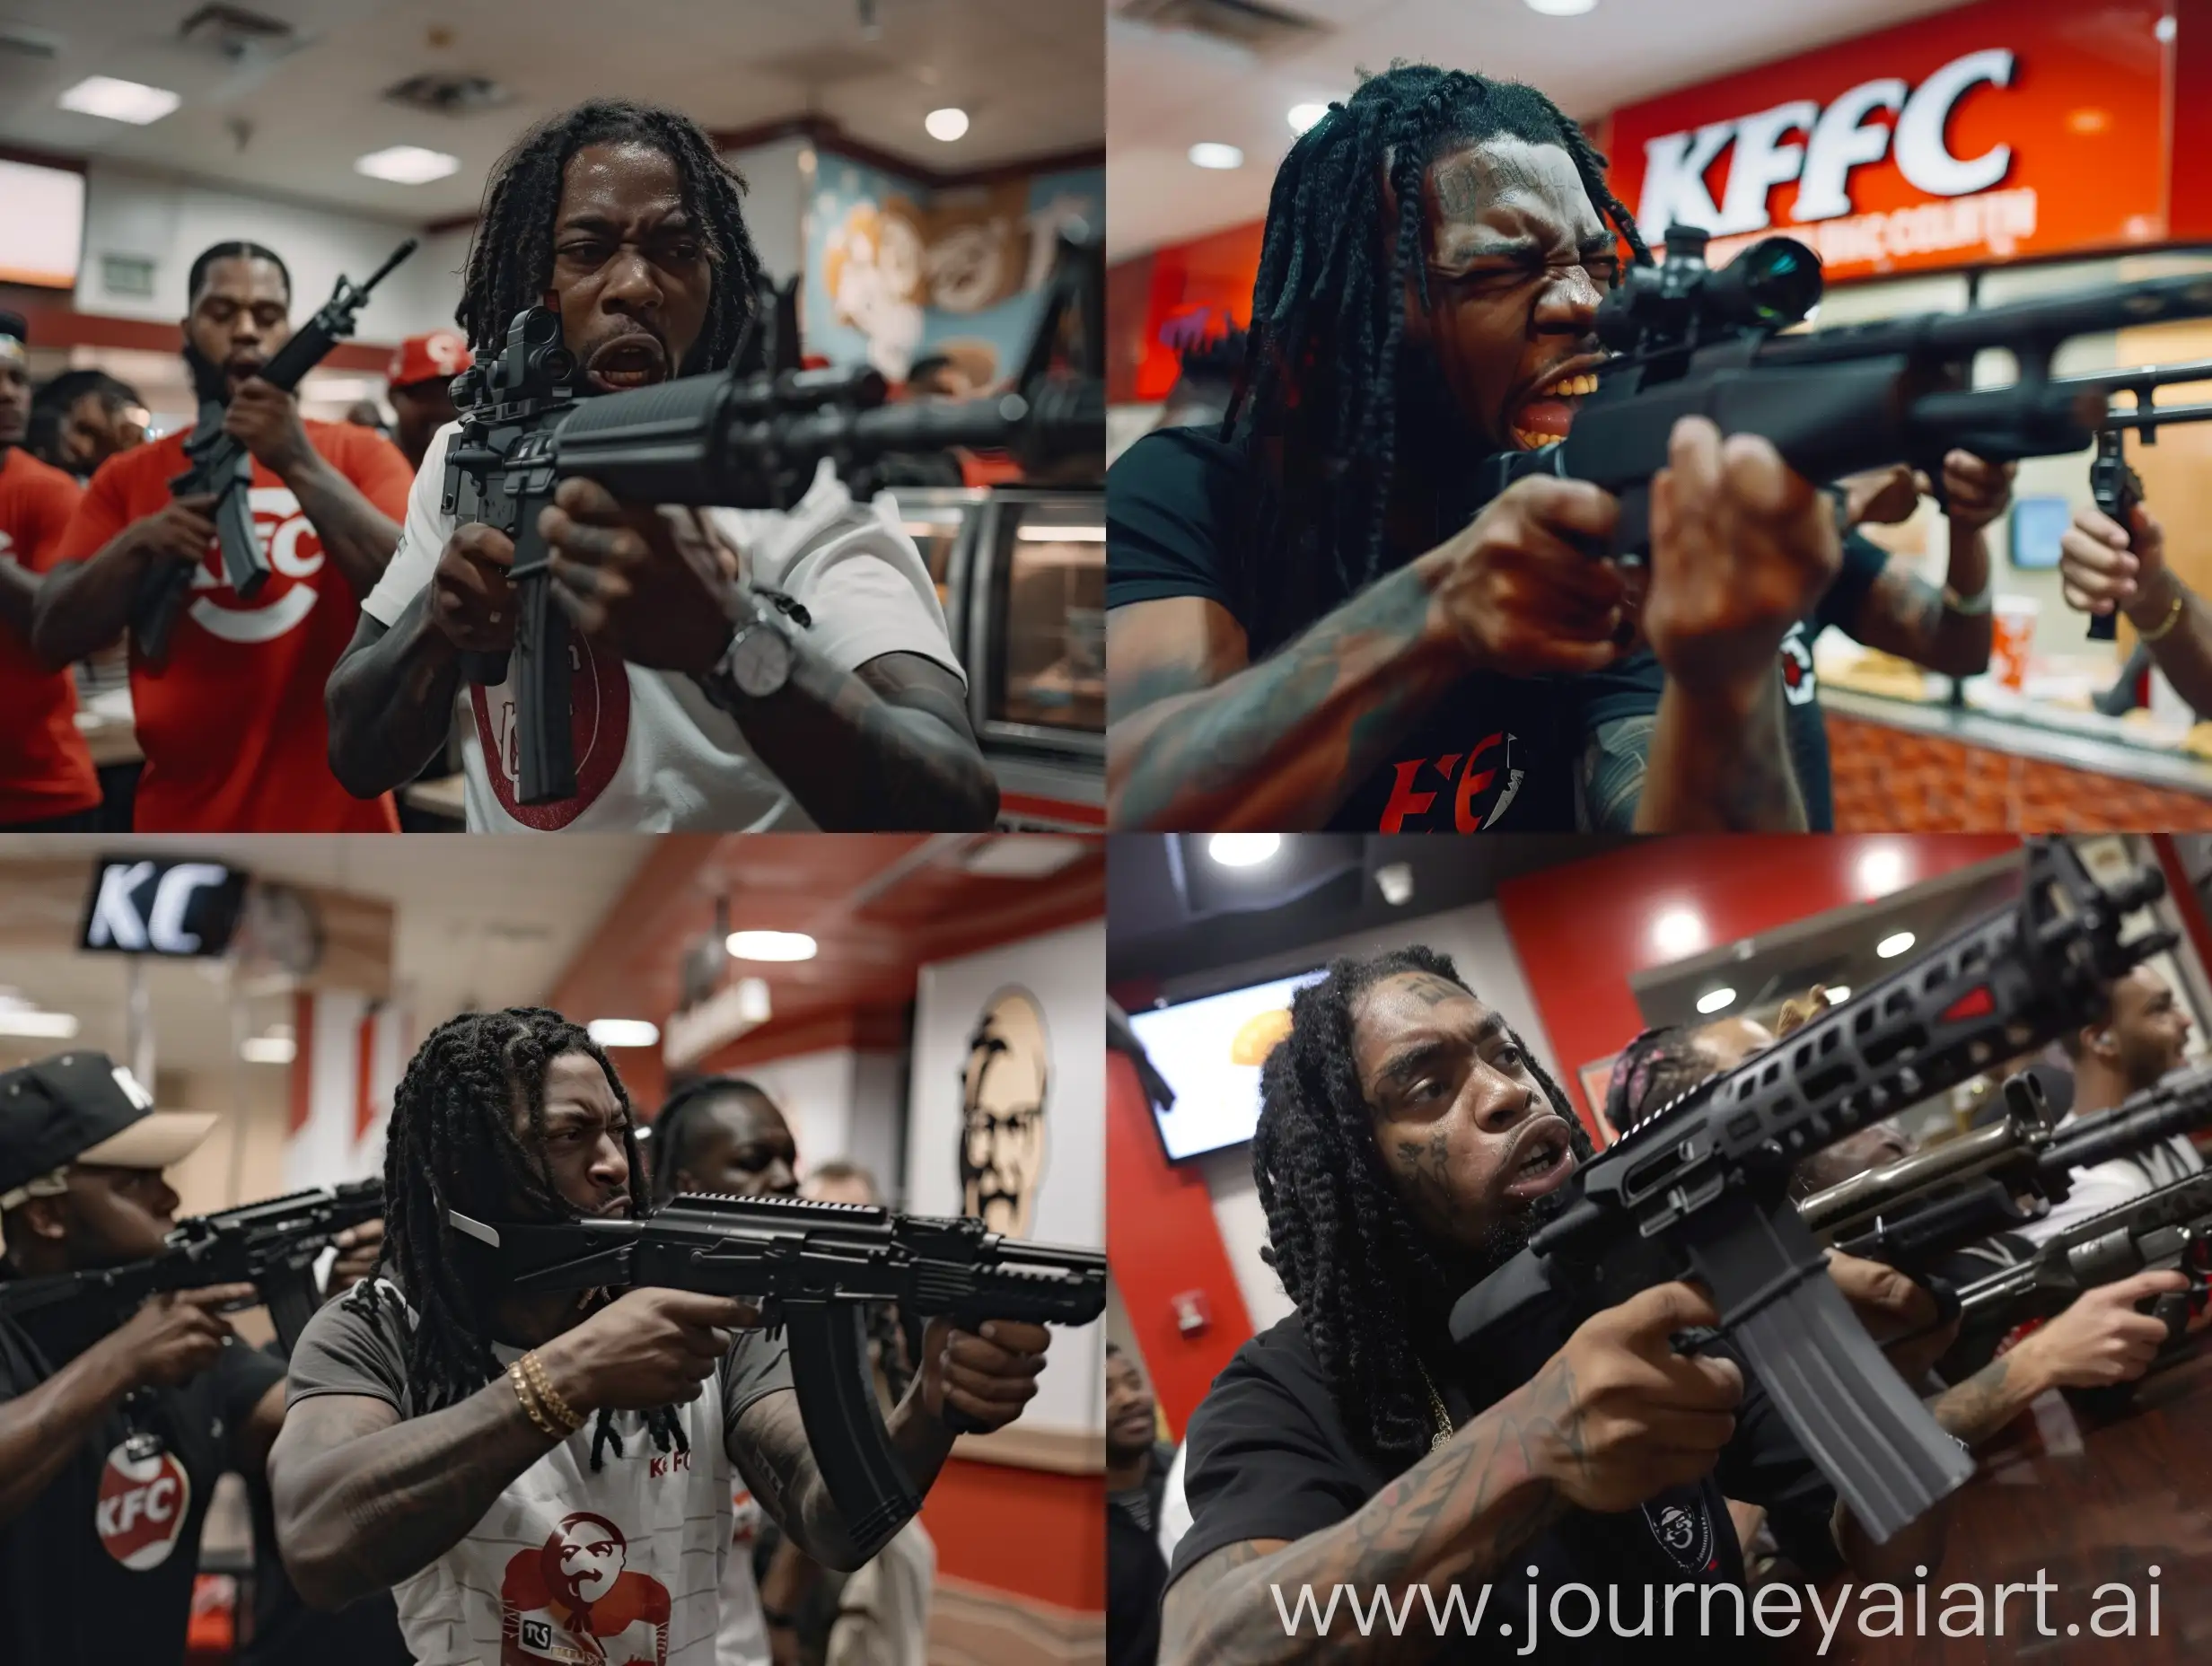 chicago rapper chief keef,in a fight inside kfc with his while thry holding black rifles fighting kfc emplyoes,funny secruity camera footage point of view